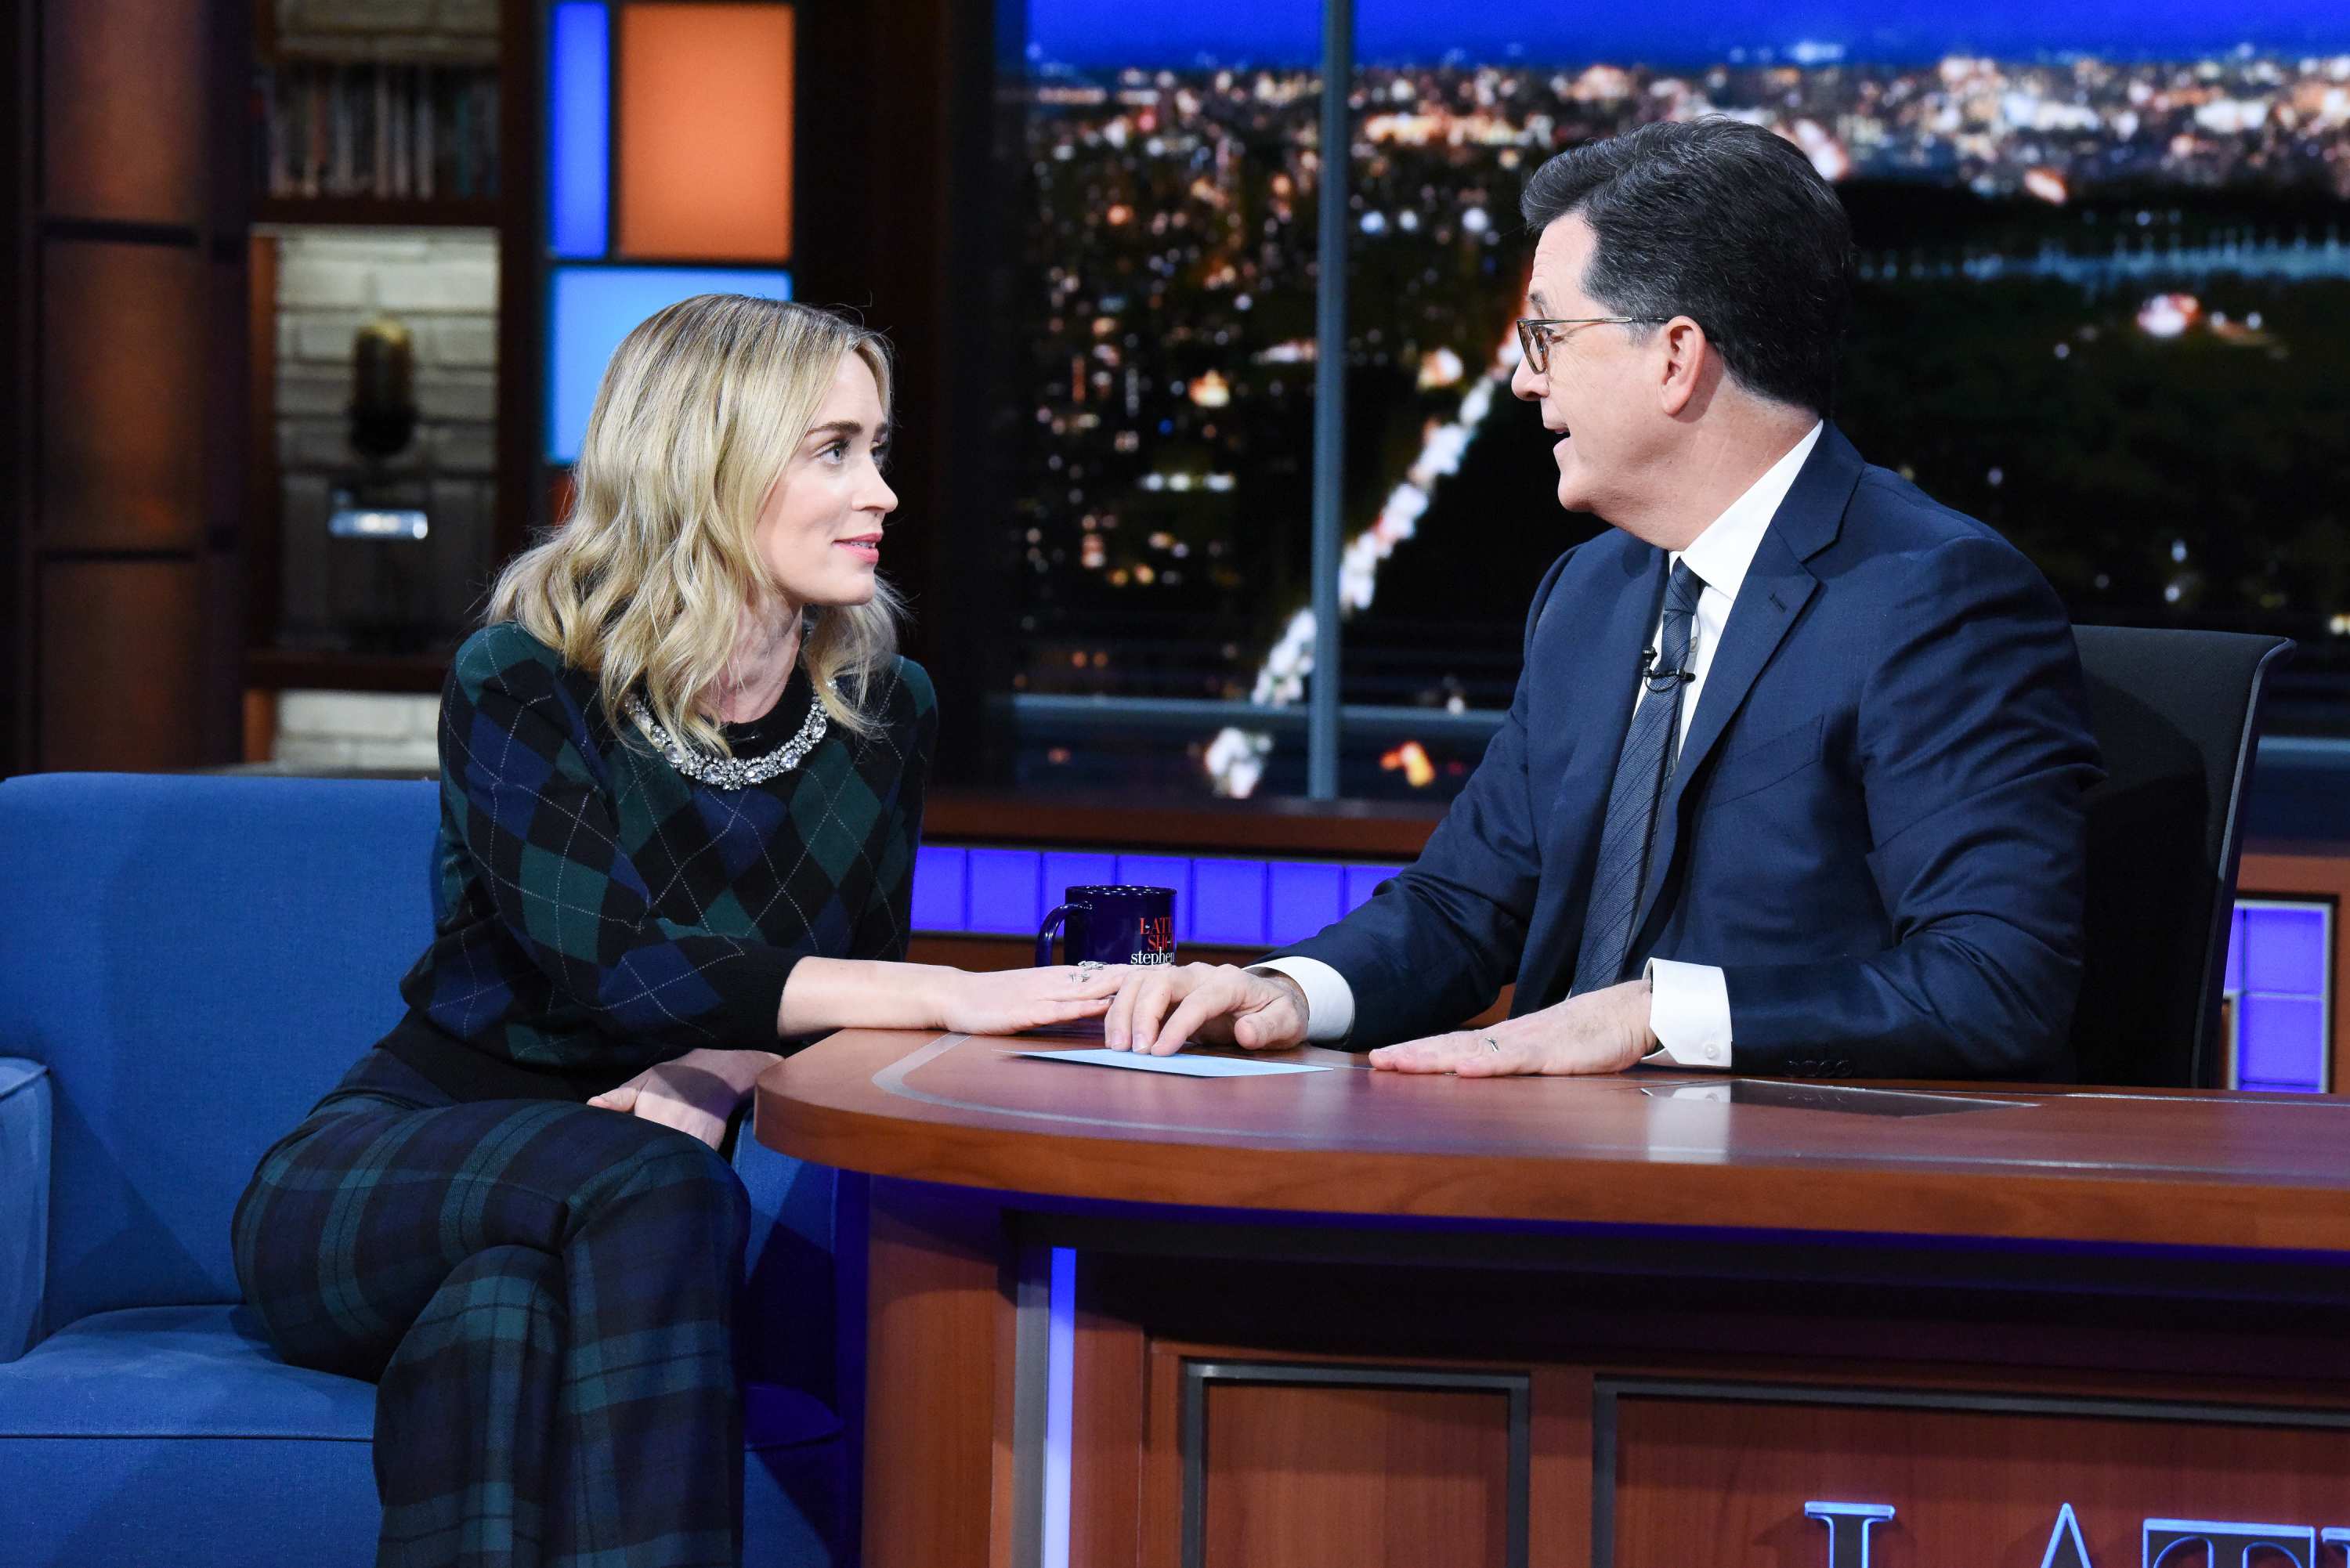 Emily_Blunt_-_The_Late_Show_with_Stephen_Colbert_-_December_18_2018-03.jpg